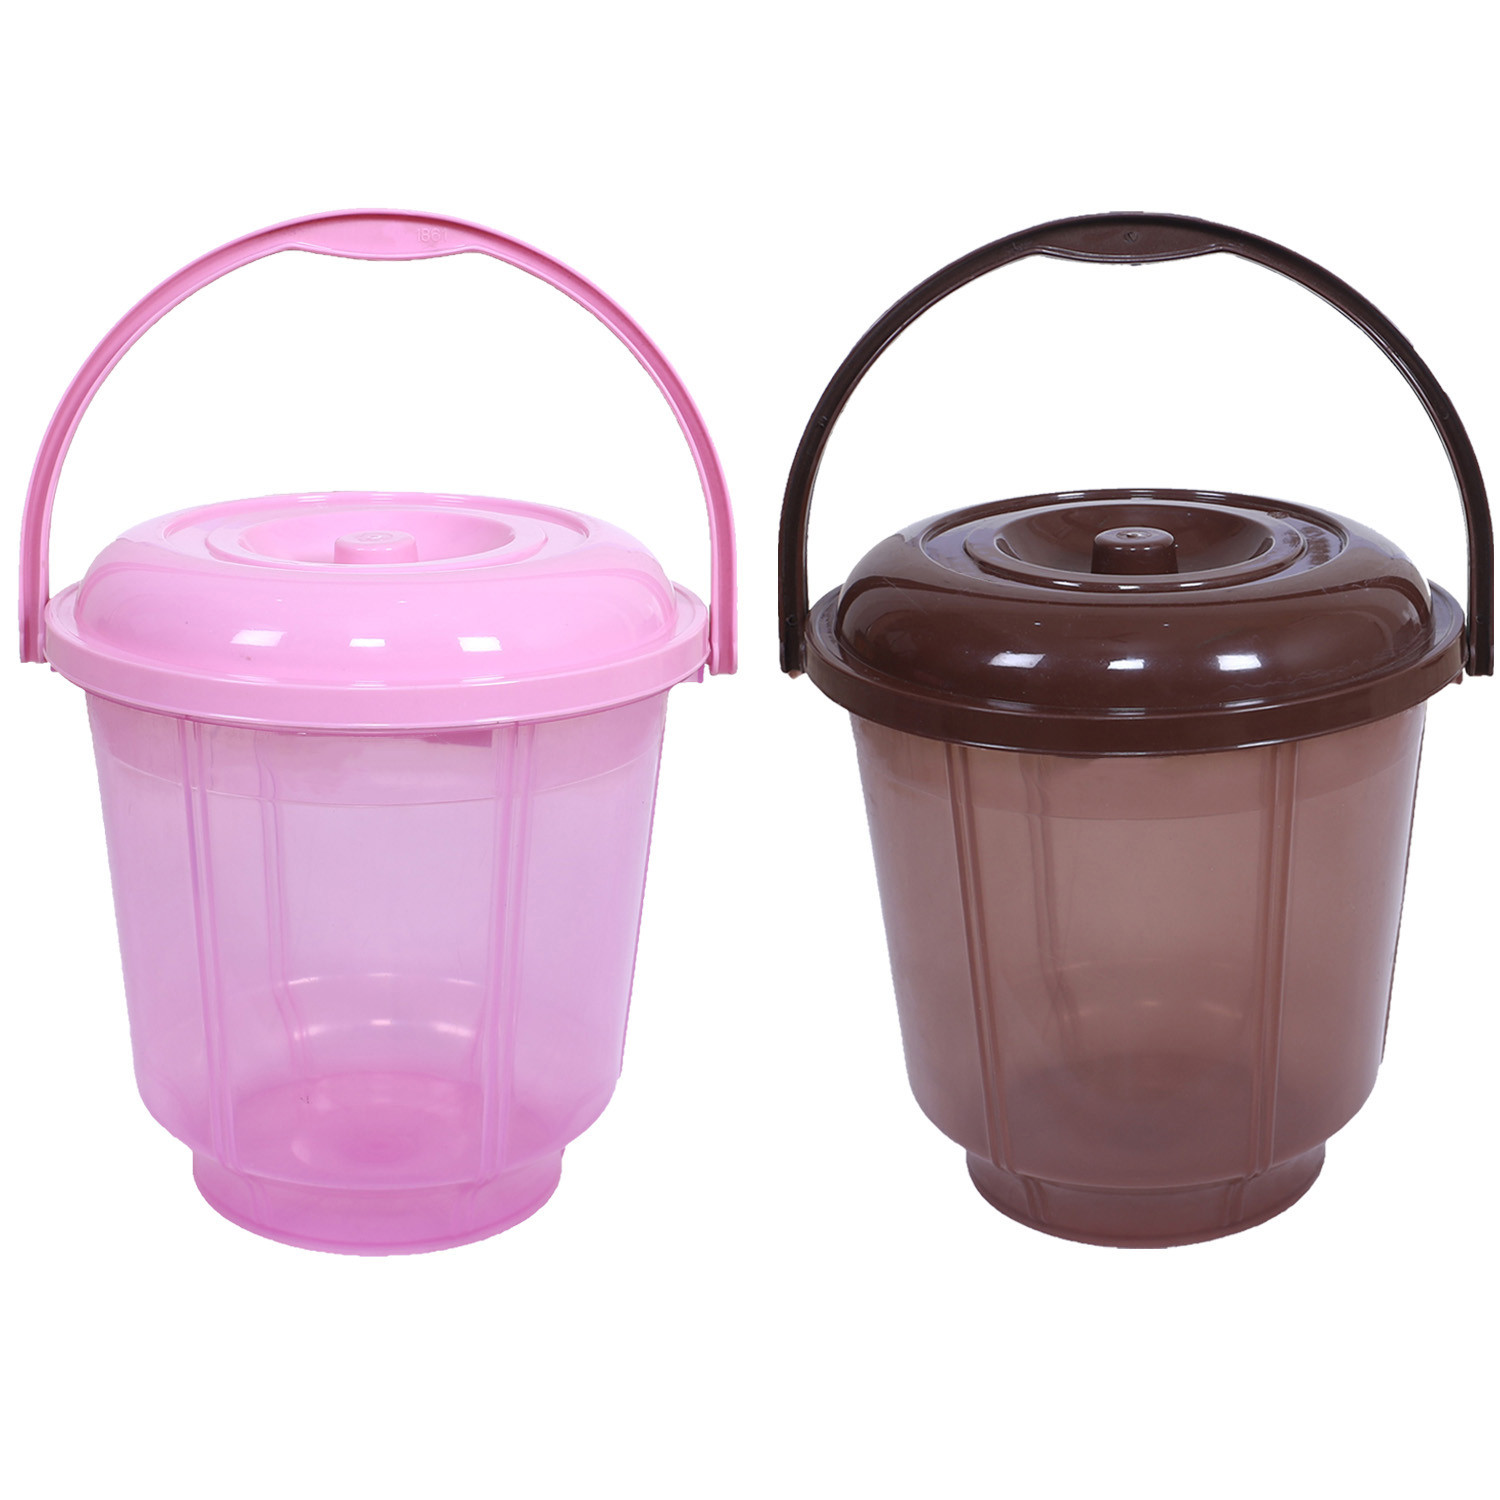 Kuber Industries Colorful Homeware Bucket|Unbreakable Plastic Bucket|Transparent Bucket with Lid & Handle for Bathroom,Home Use,13 Litre,Pack of 2 (Pink & Brown)